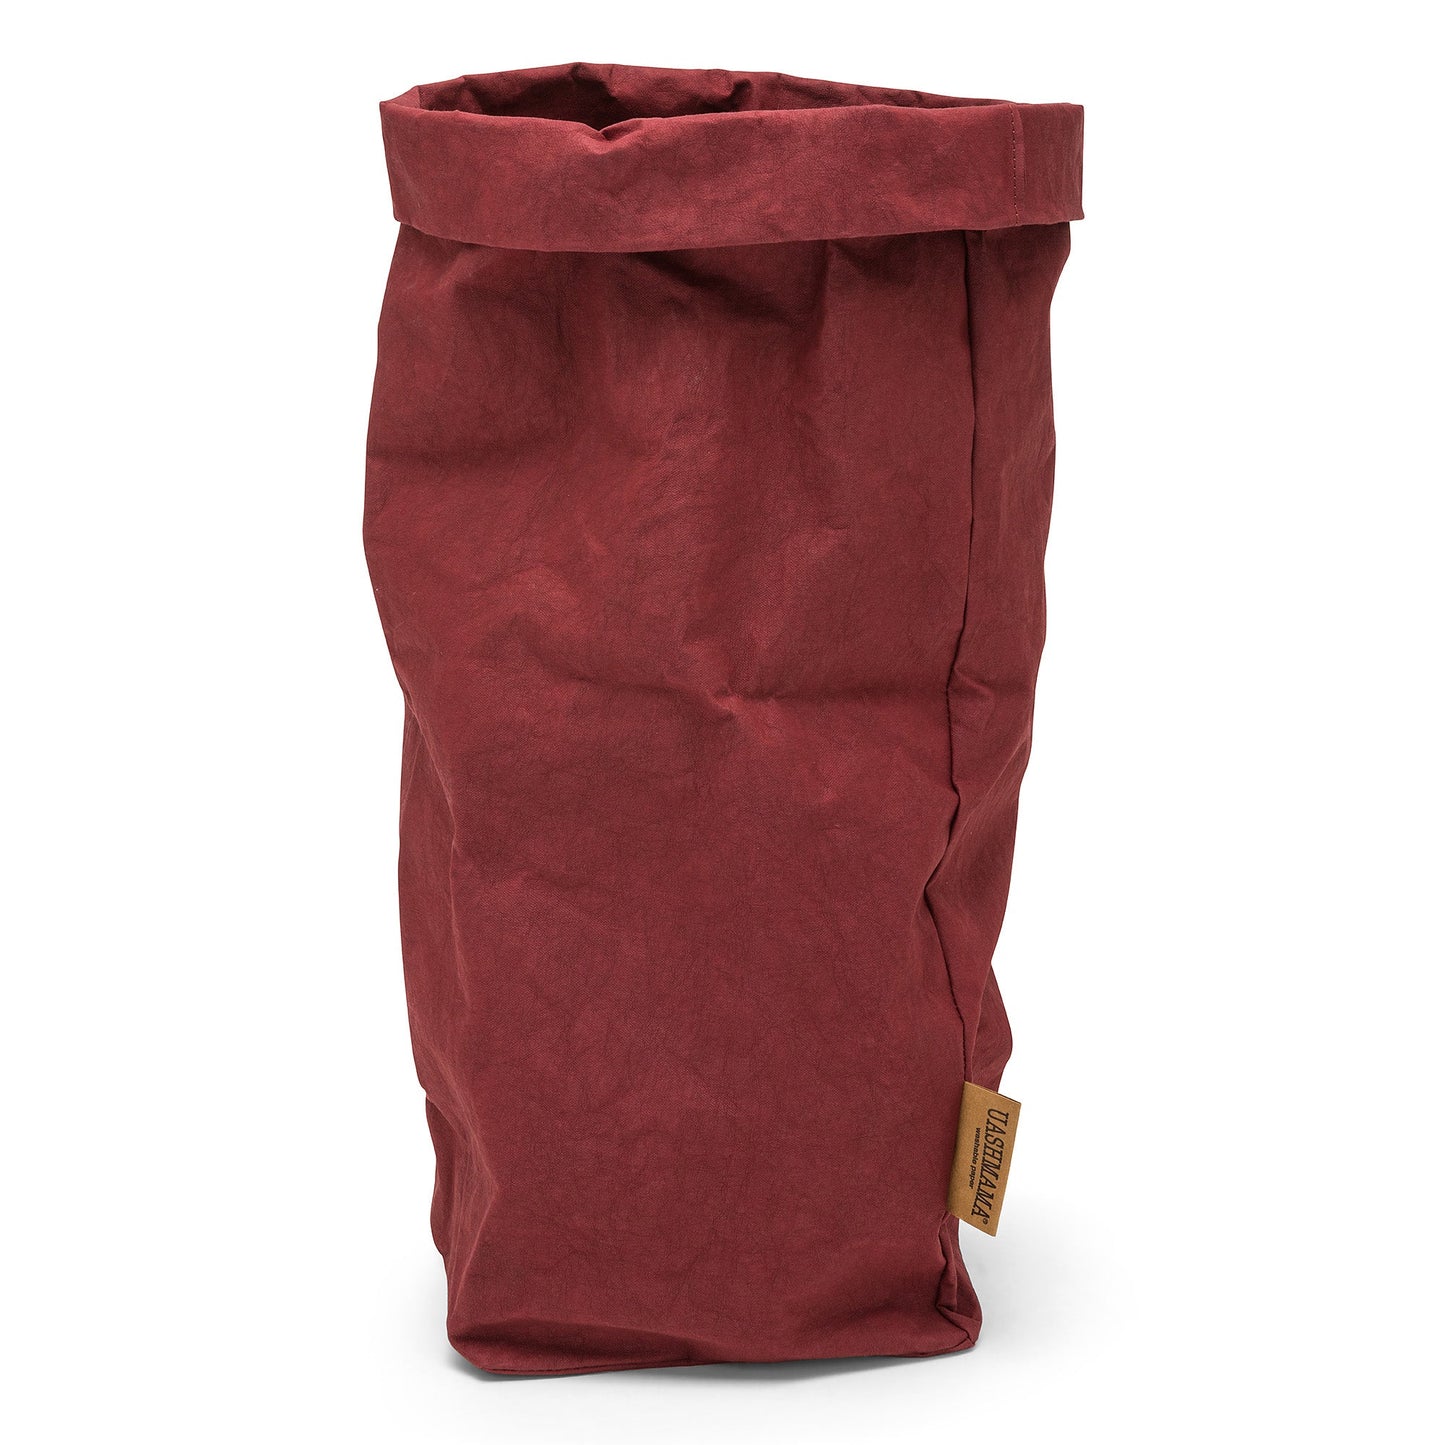 A washable paper bag is shown. The bag is rolled down at the top and features a UASHMAMA logo label on the bottom left corner. The bag pictured is the extra large size in dark red.